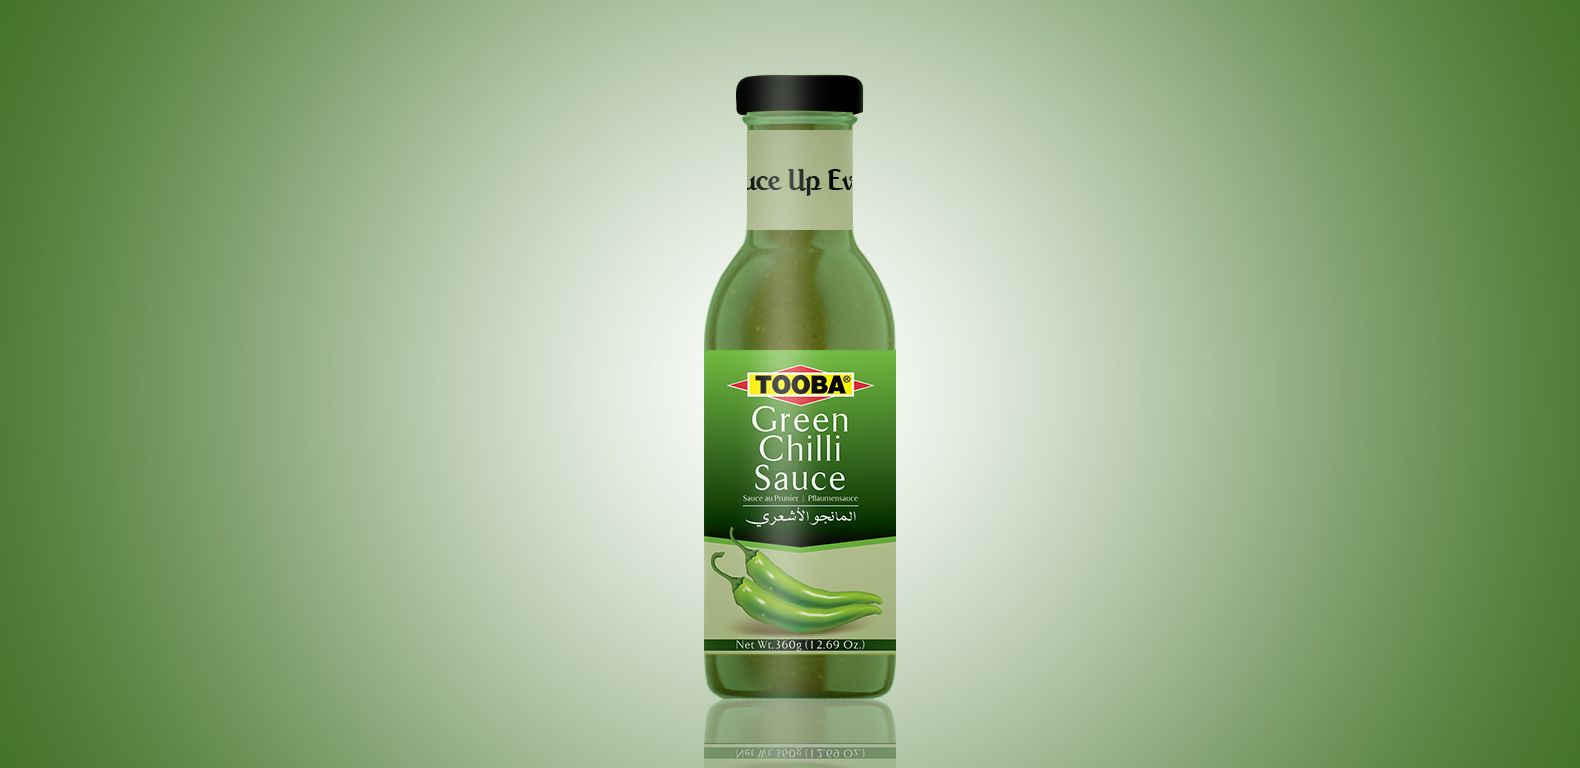 Packaging-Design-Tooba-Sauces-1580x768-Green-Chilli-Sauce